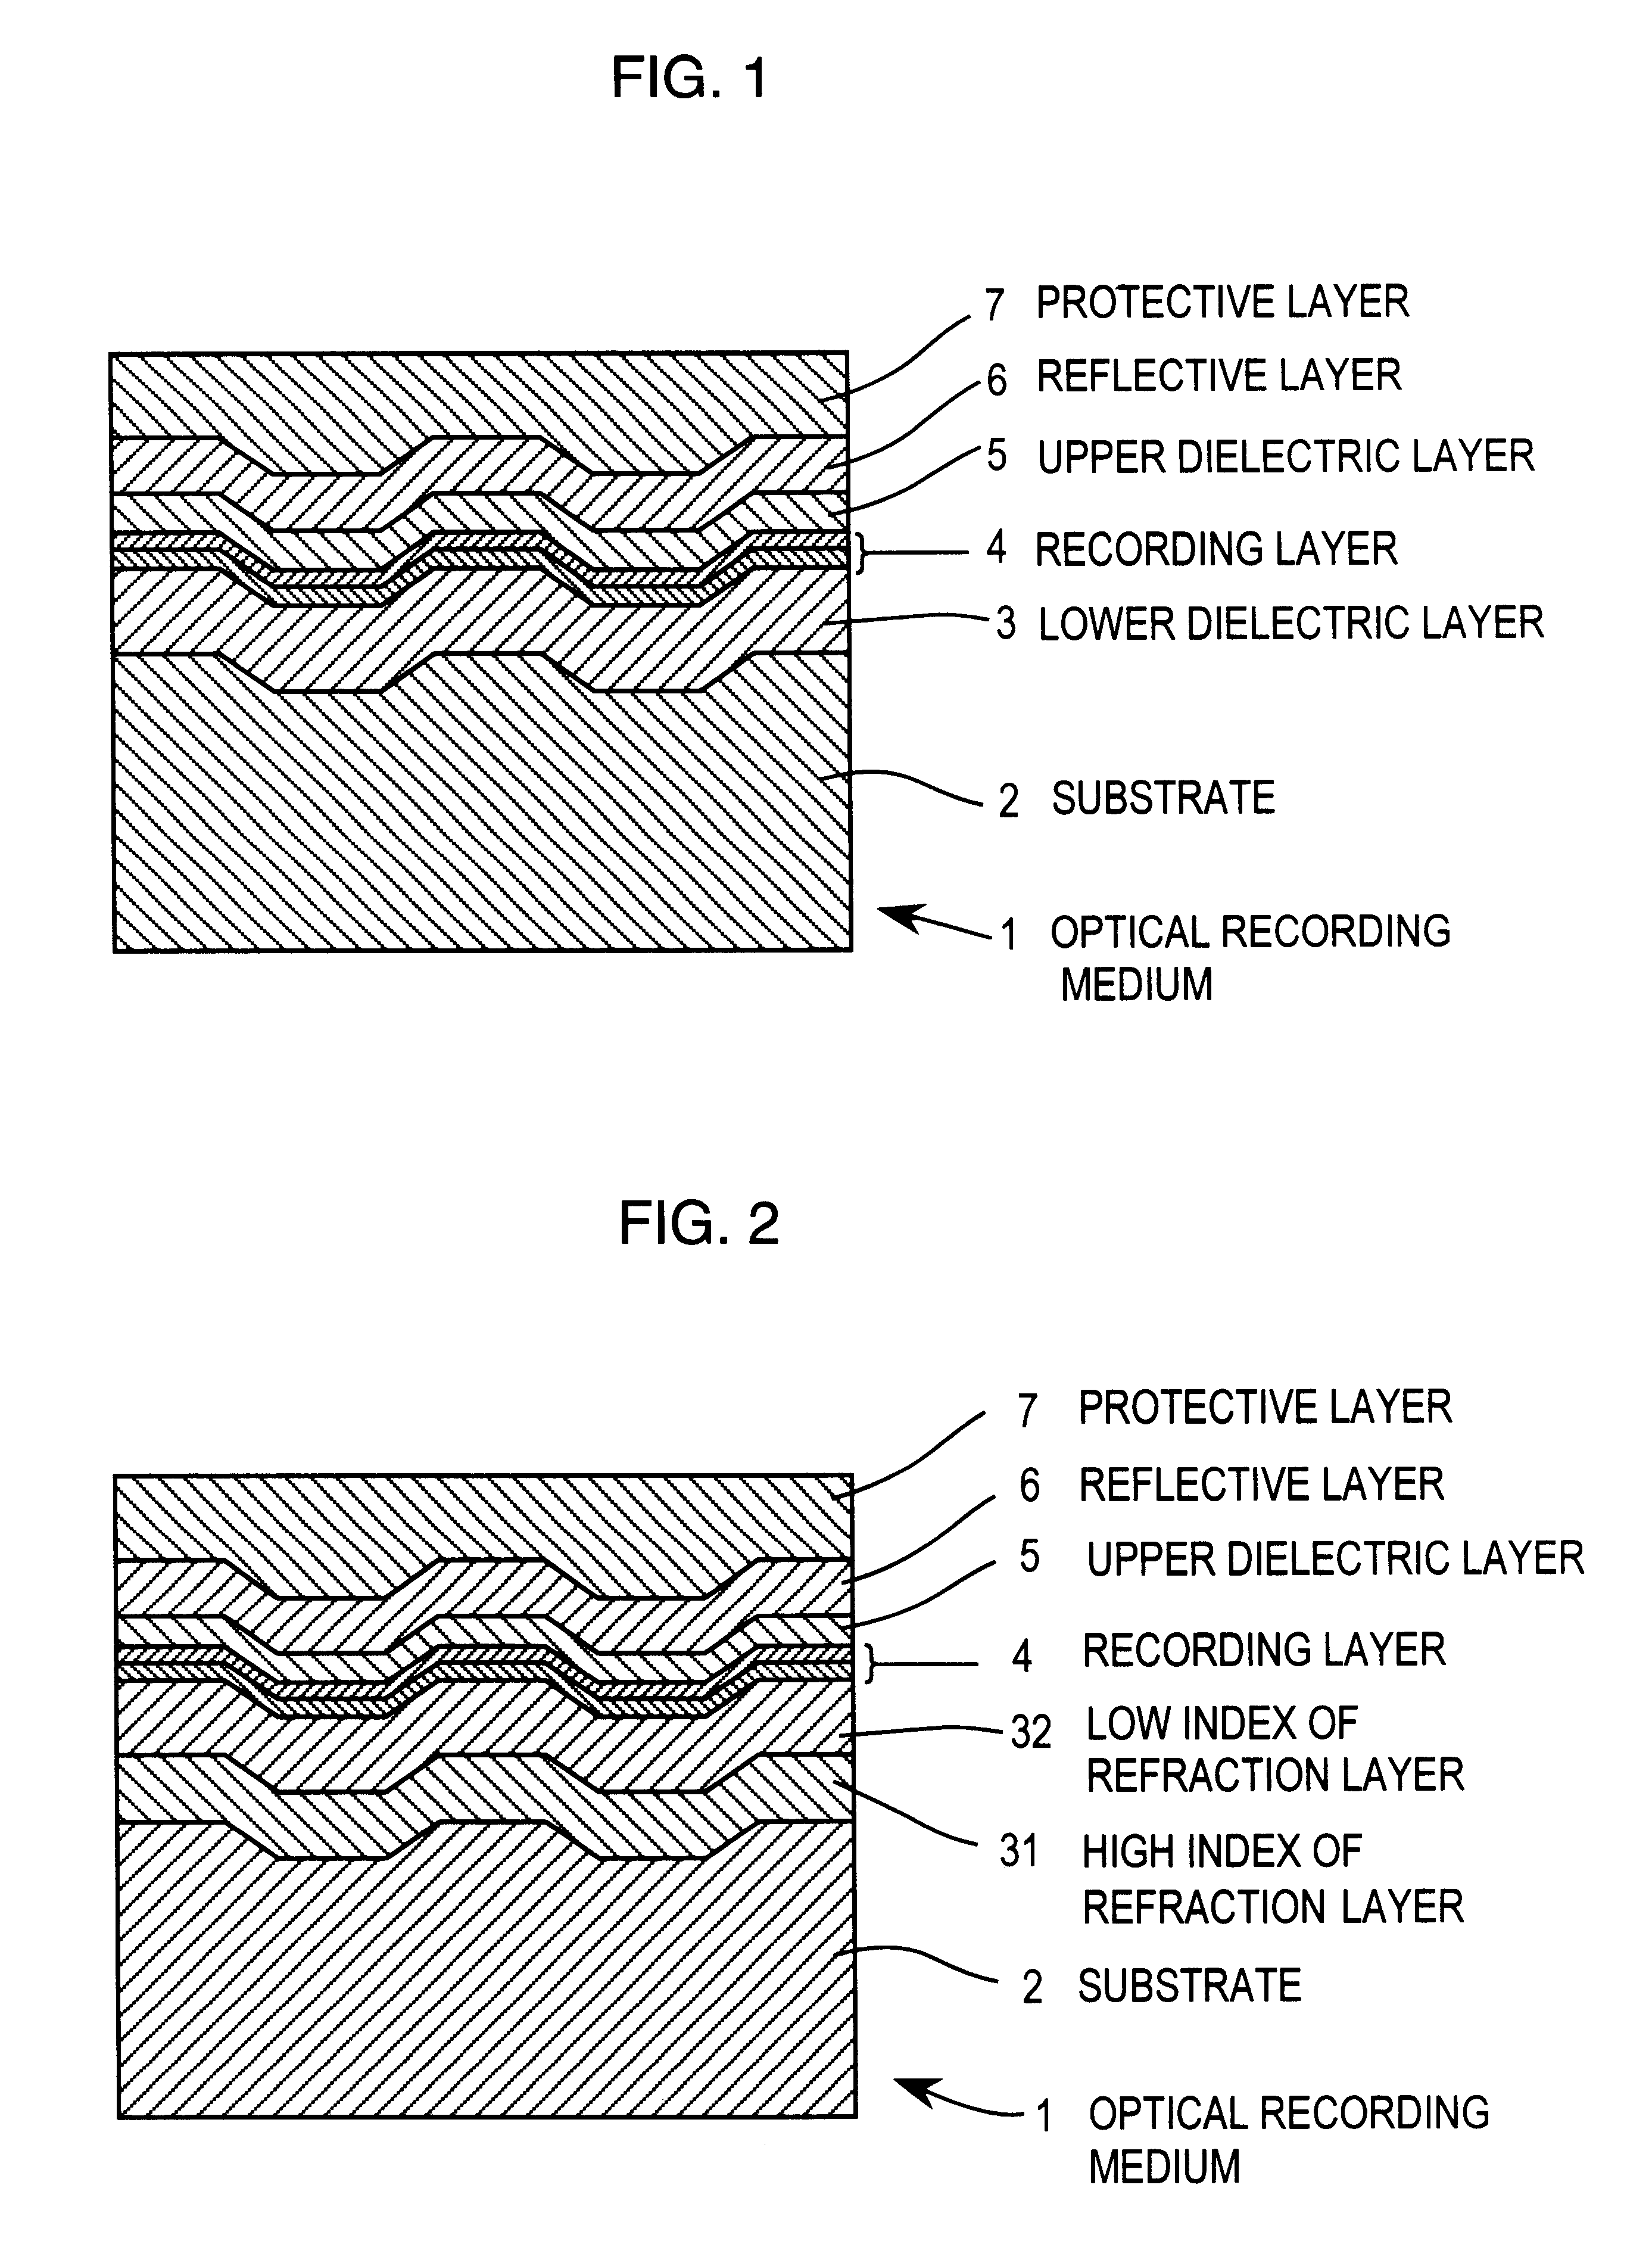 Optical recording medium and method for making